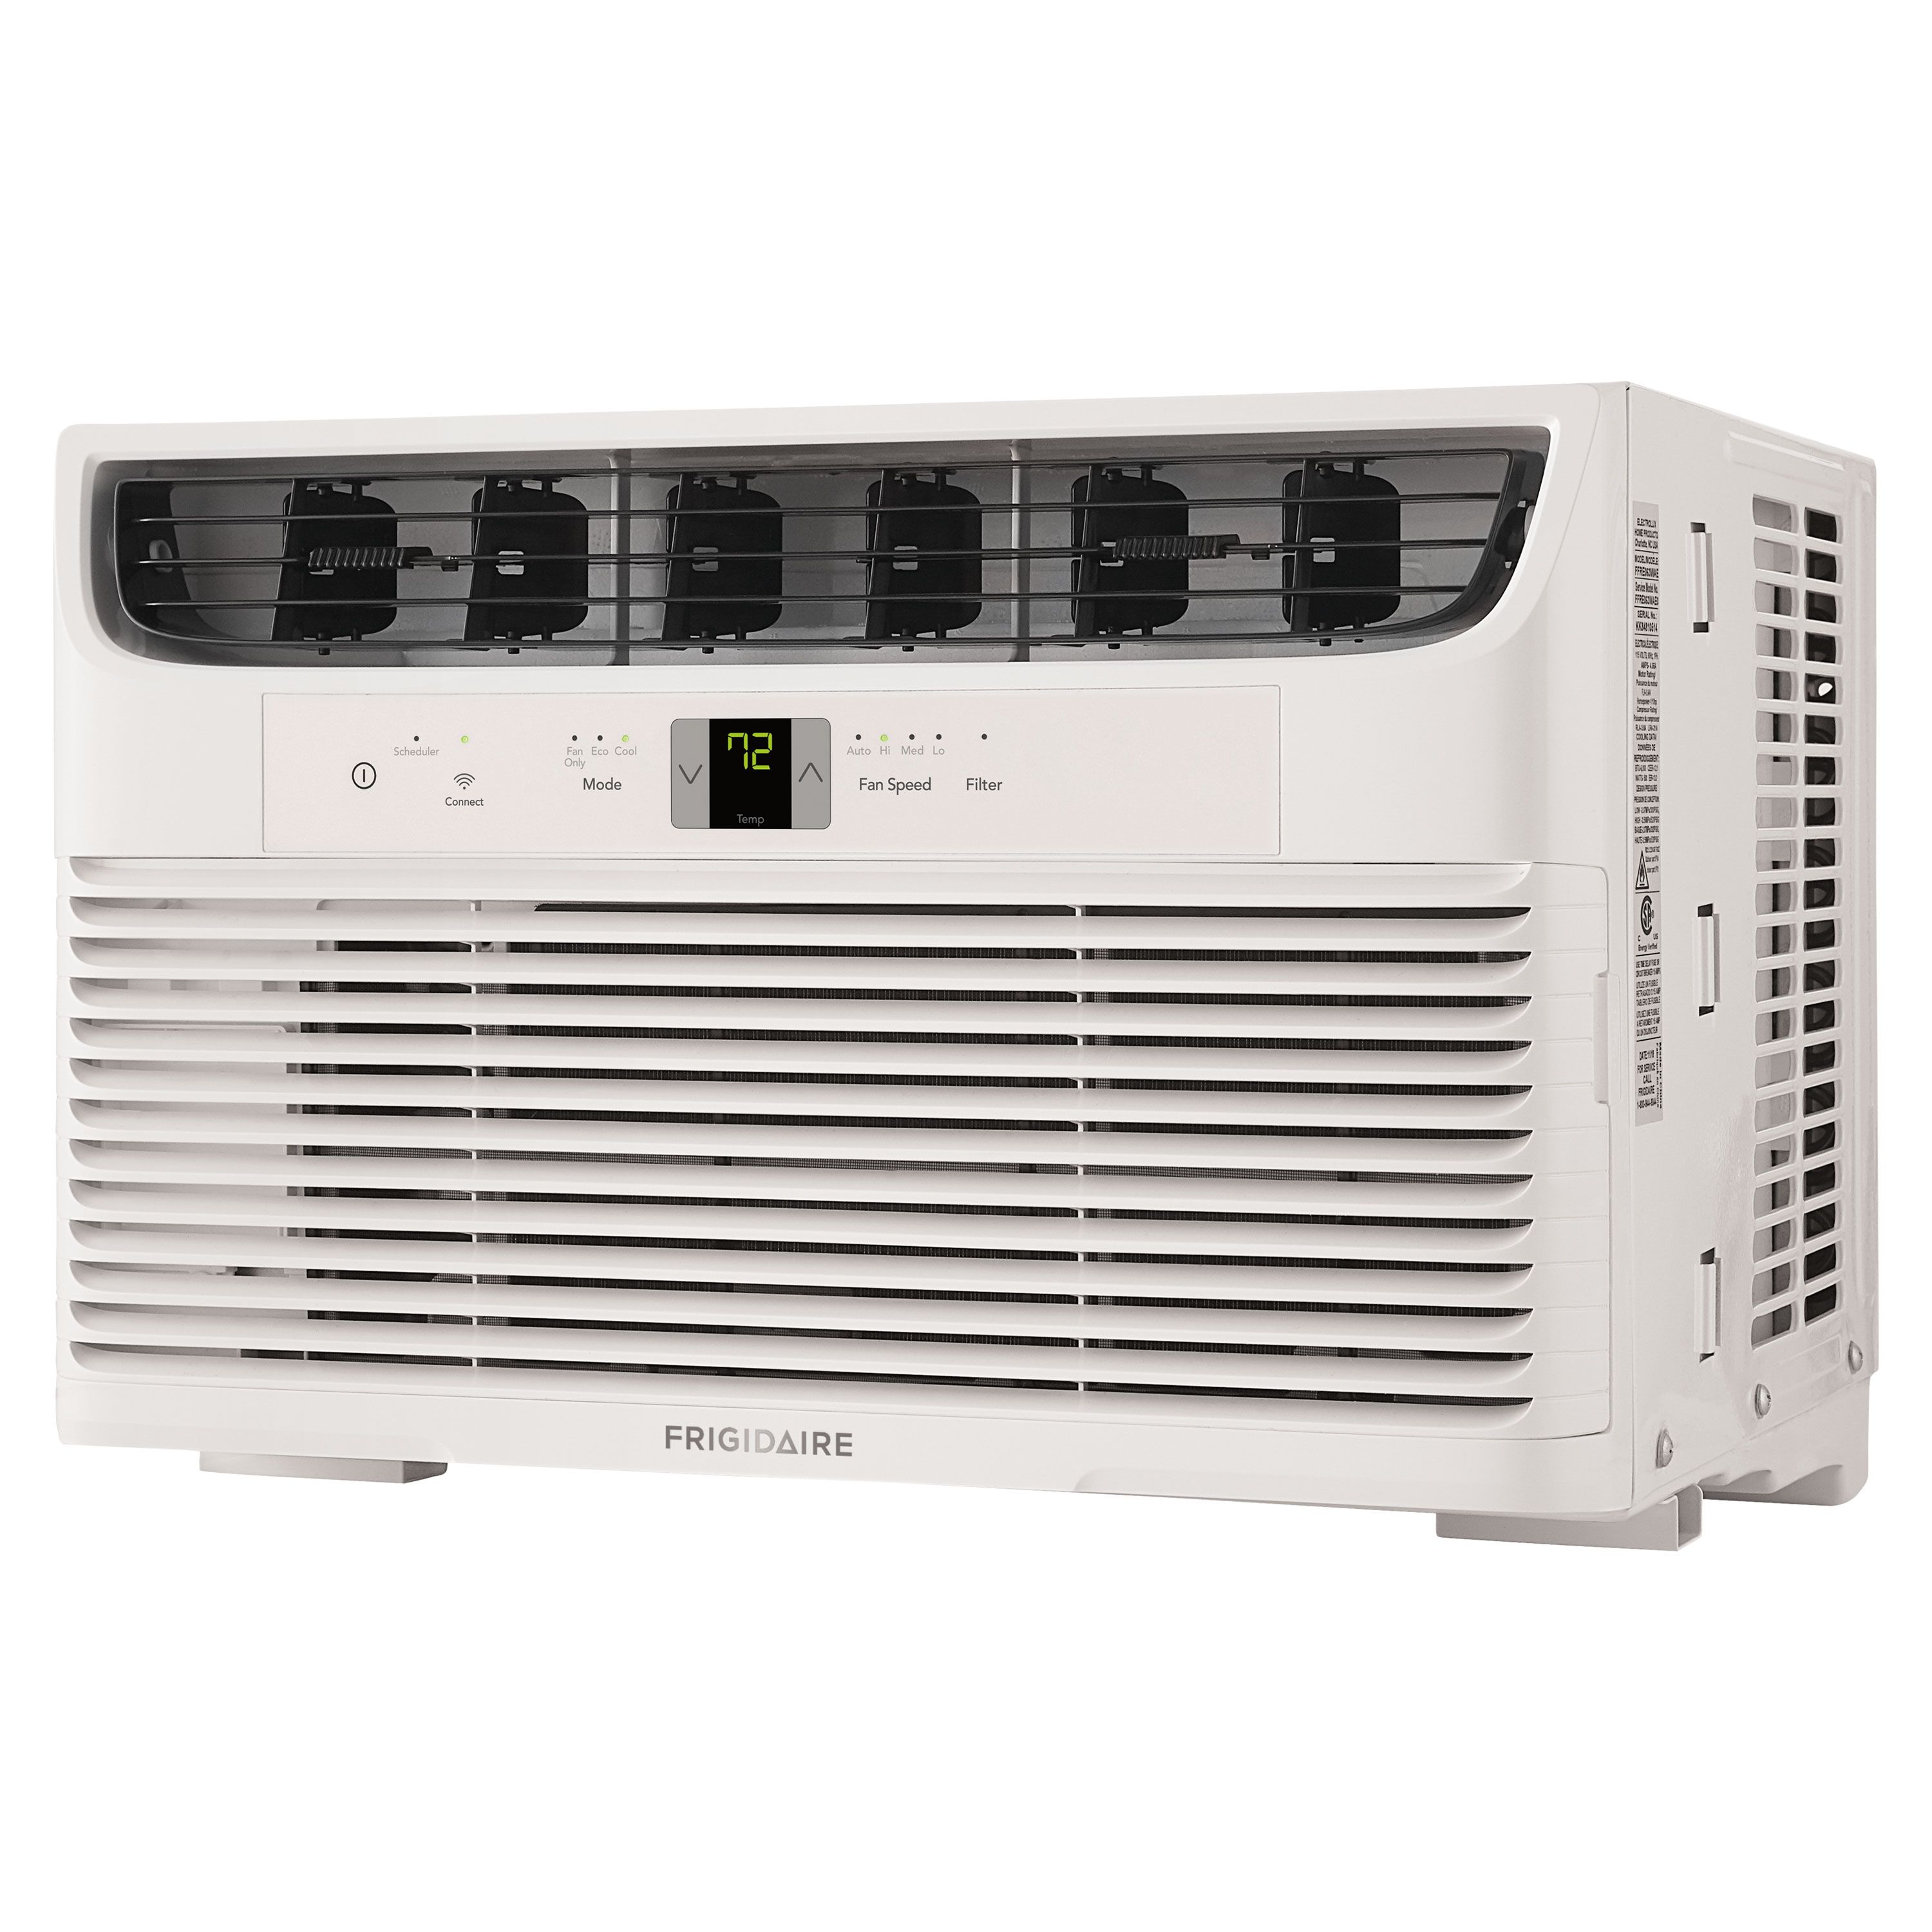 Frigidaire 10,000 BTU 115-Volt Window Air Conditioner with Remote, WIFI, White, FHWW102WCE - image 1 of 3